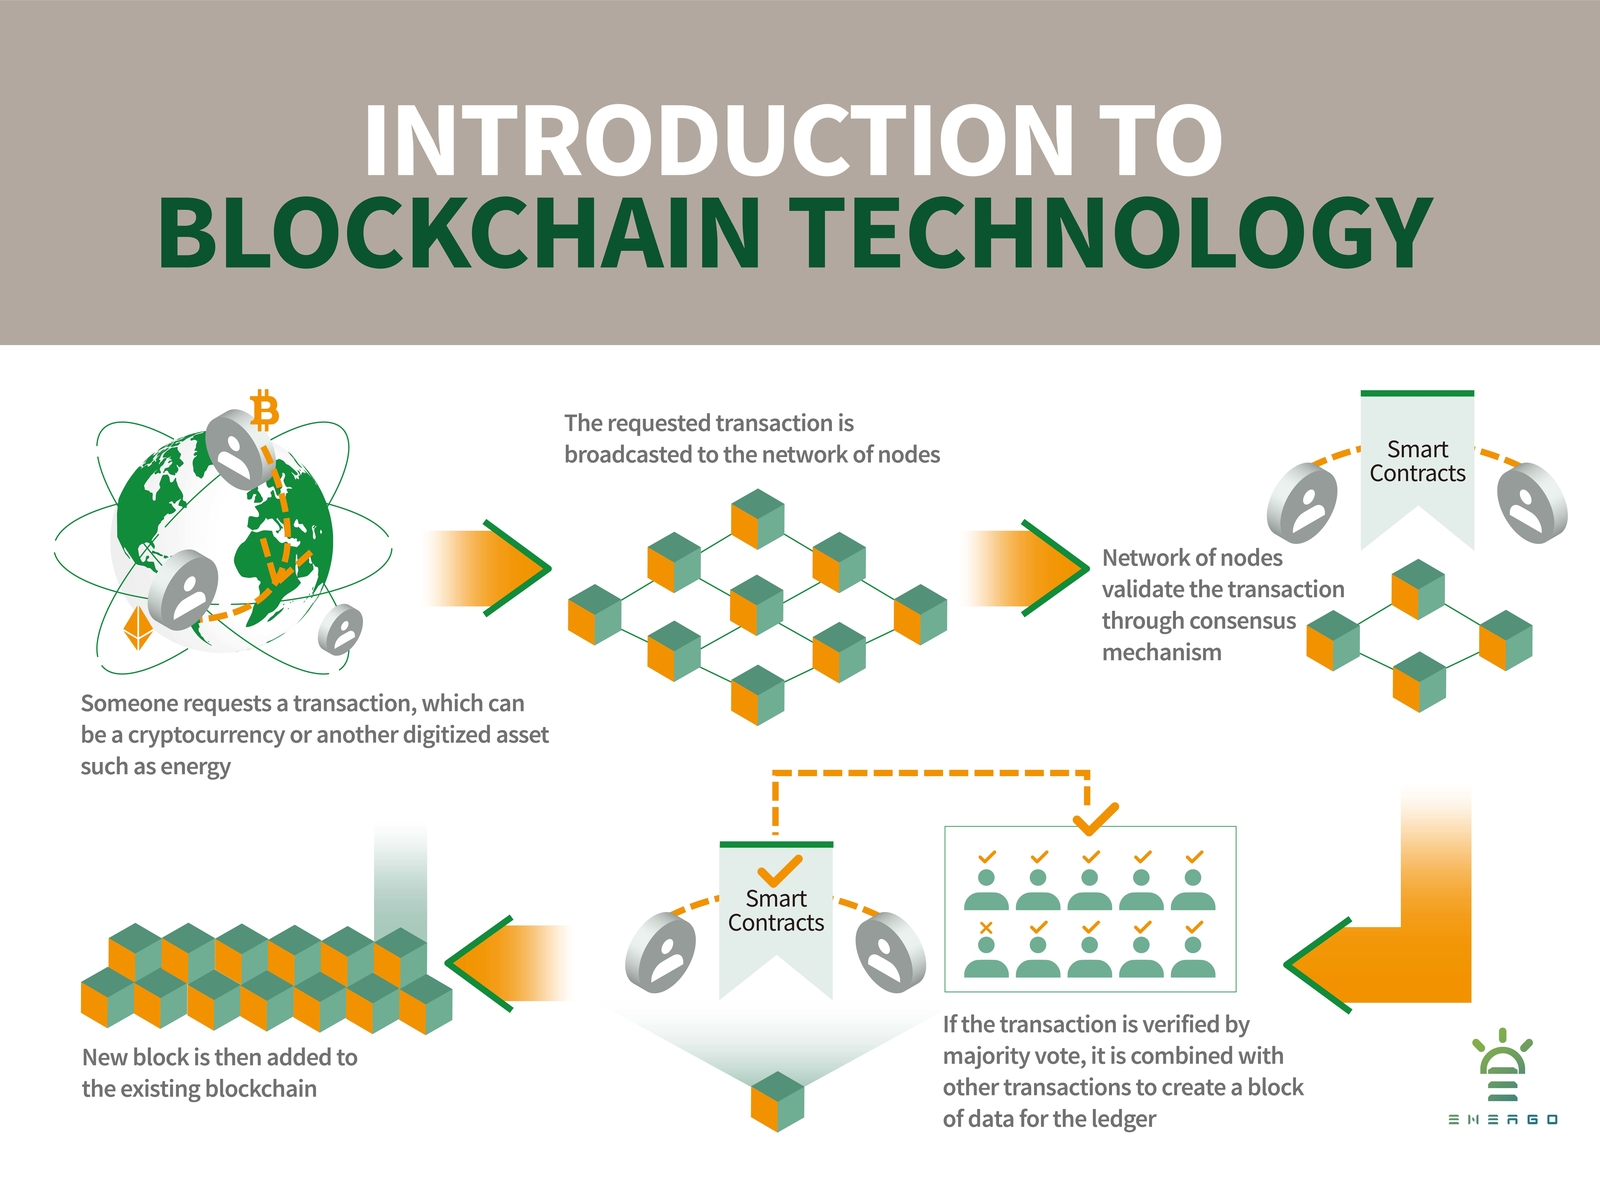 Next In Tech Infographic Blockchain 2018 by Kingsley Xie ...